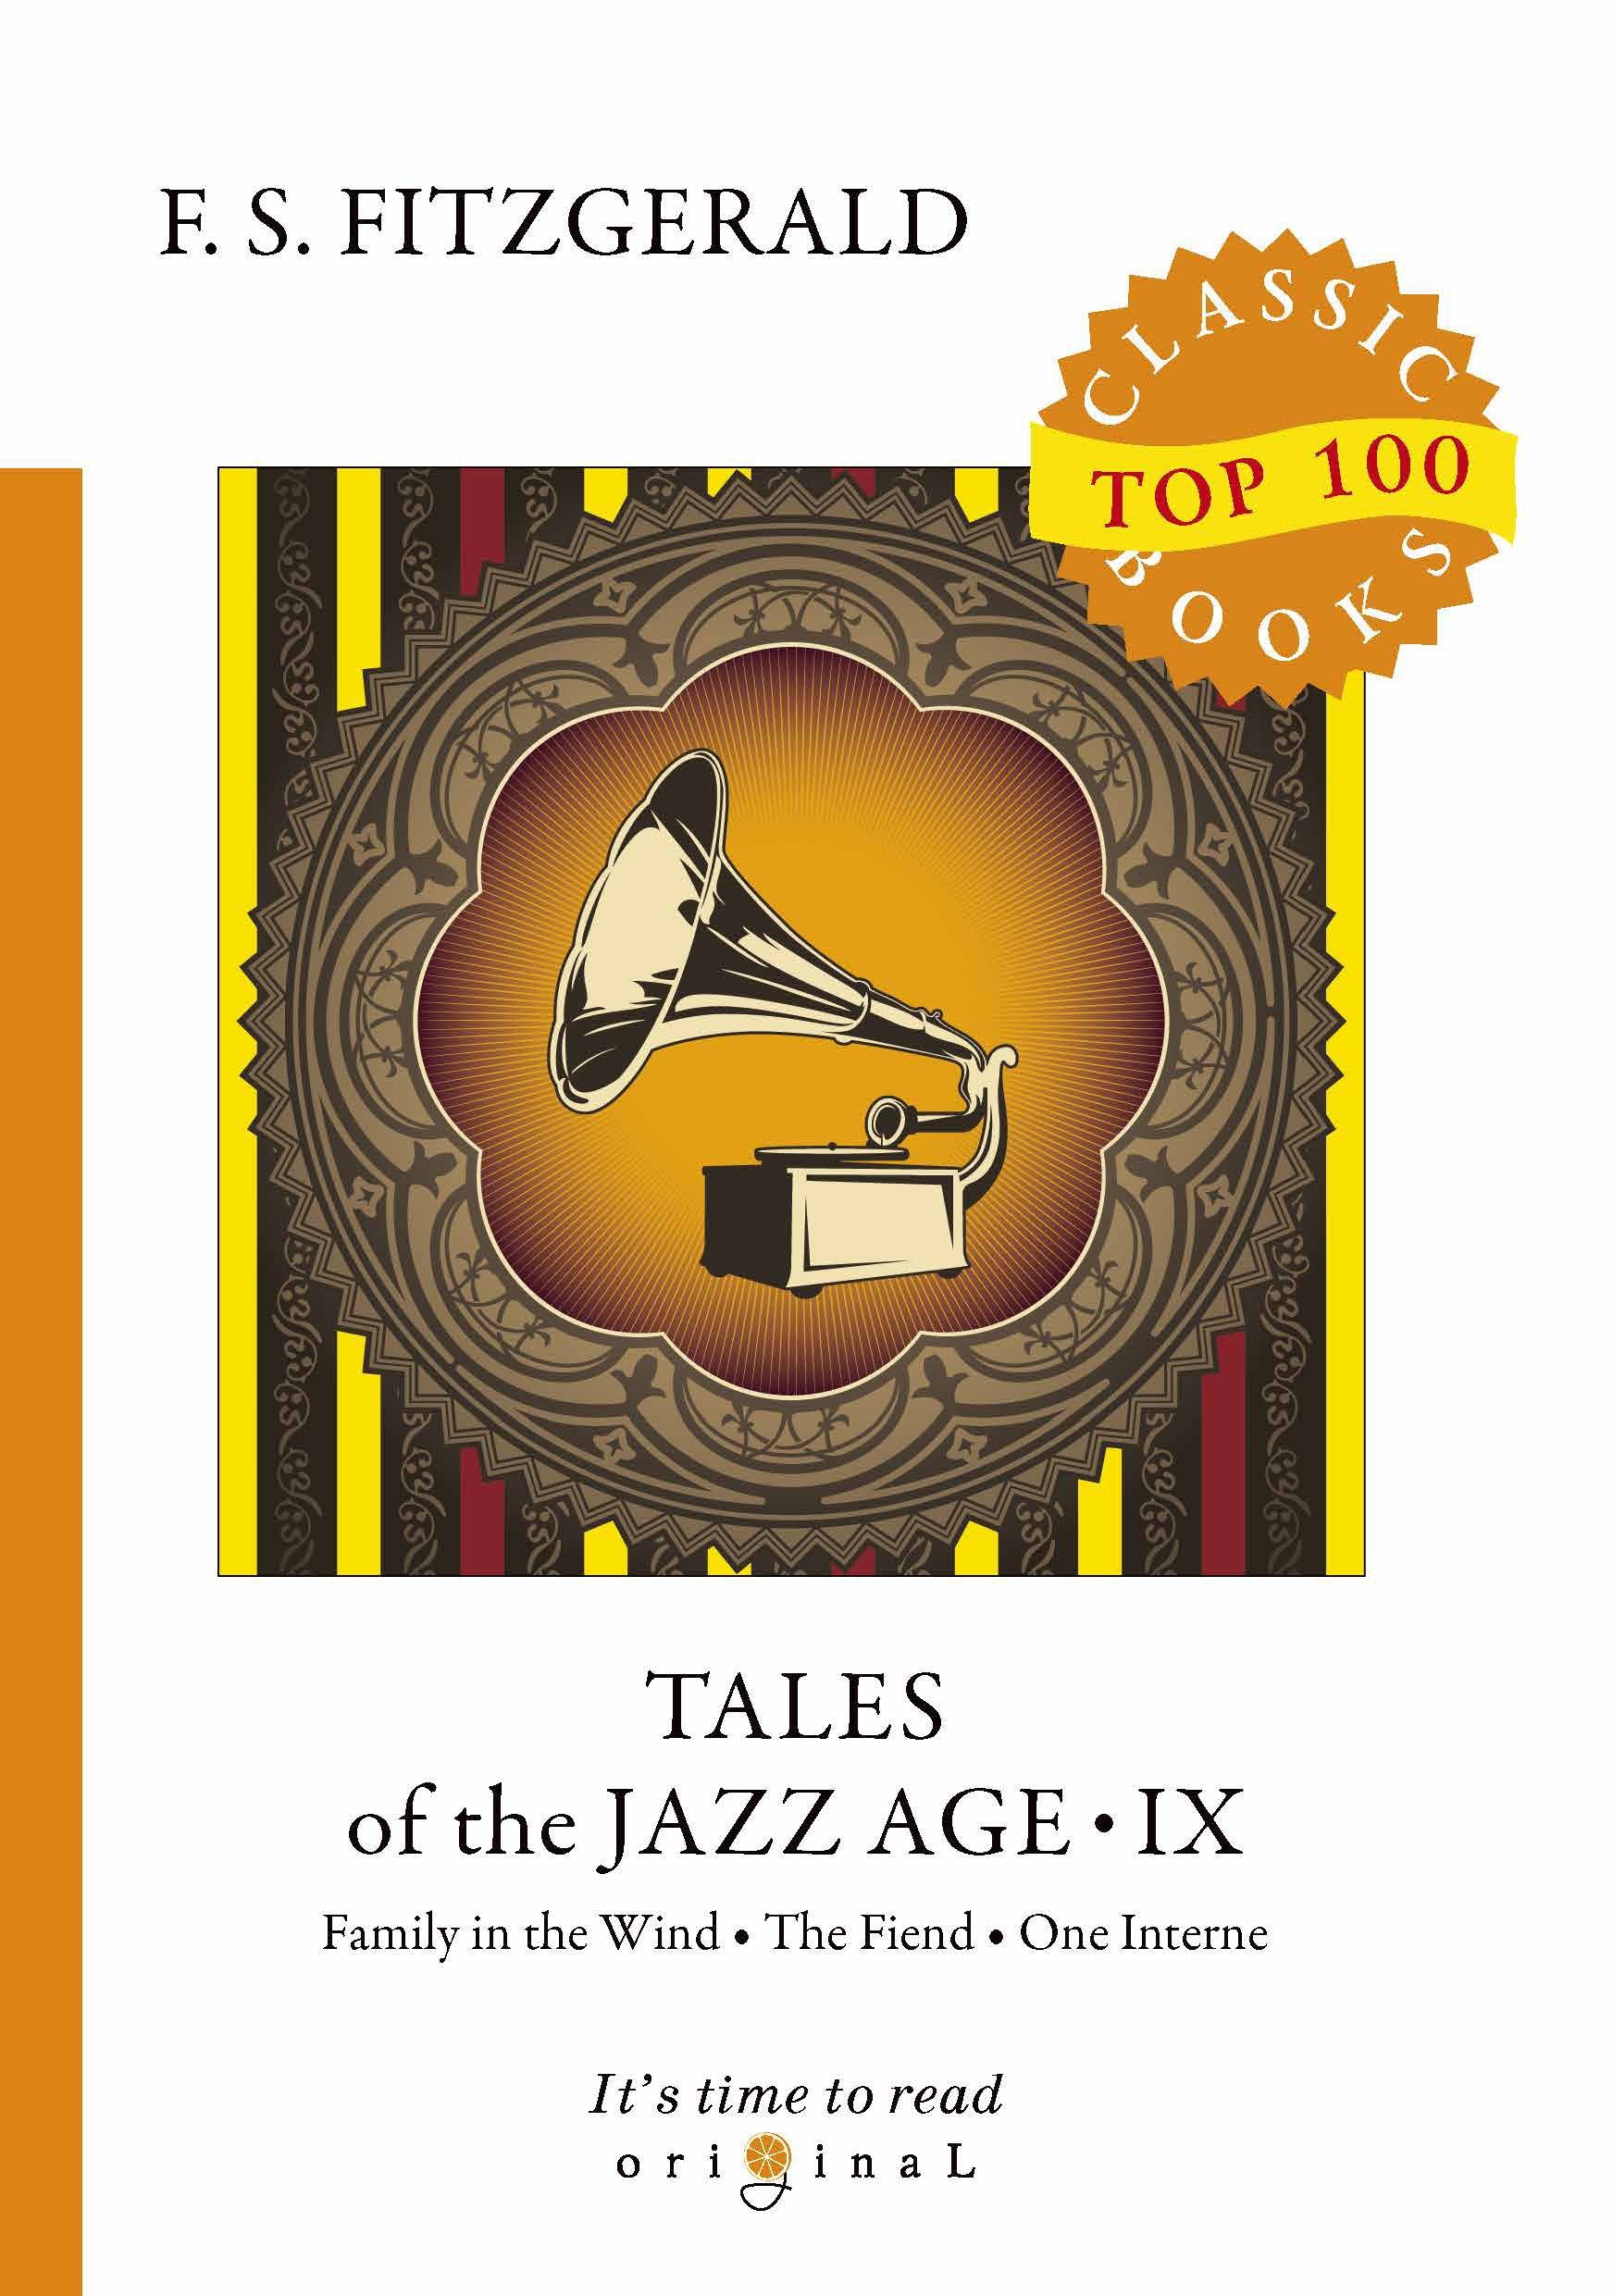 Tales of the Jazz Age 9 =    9:  .